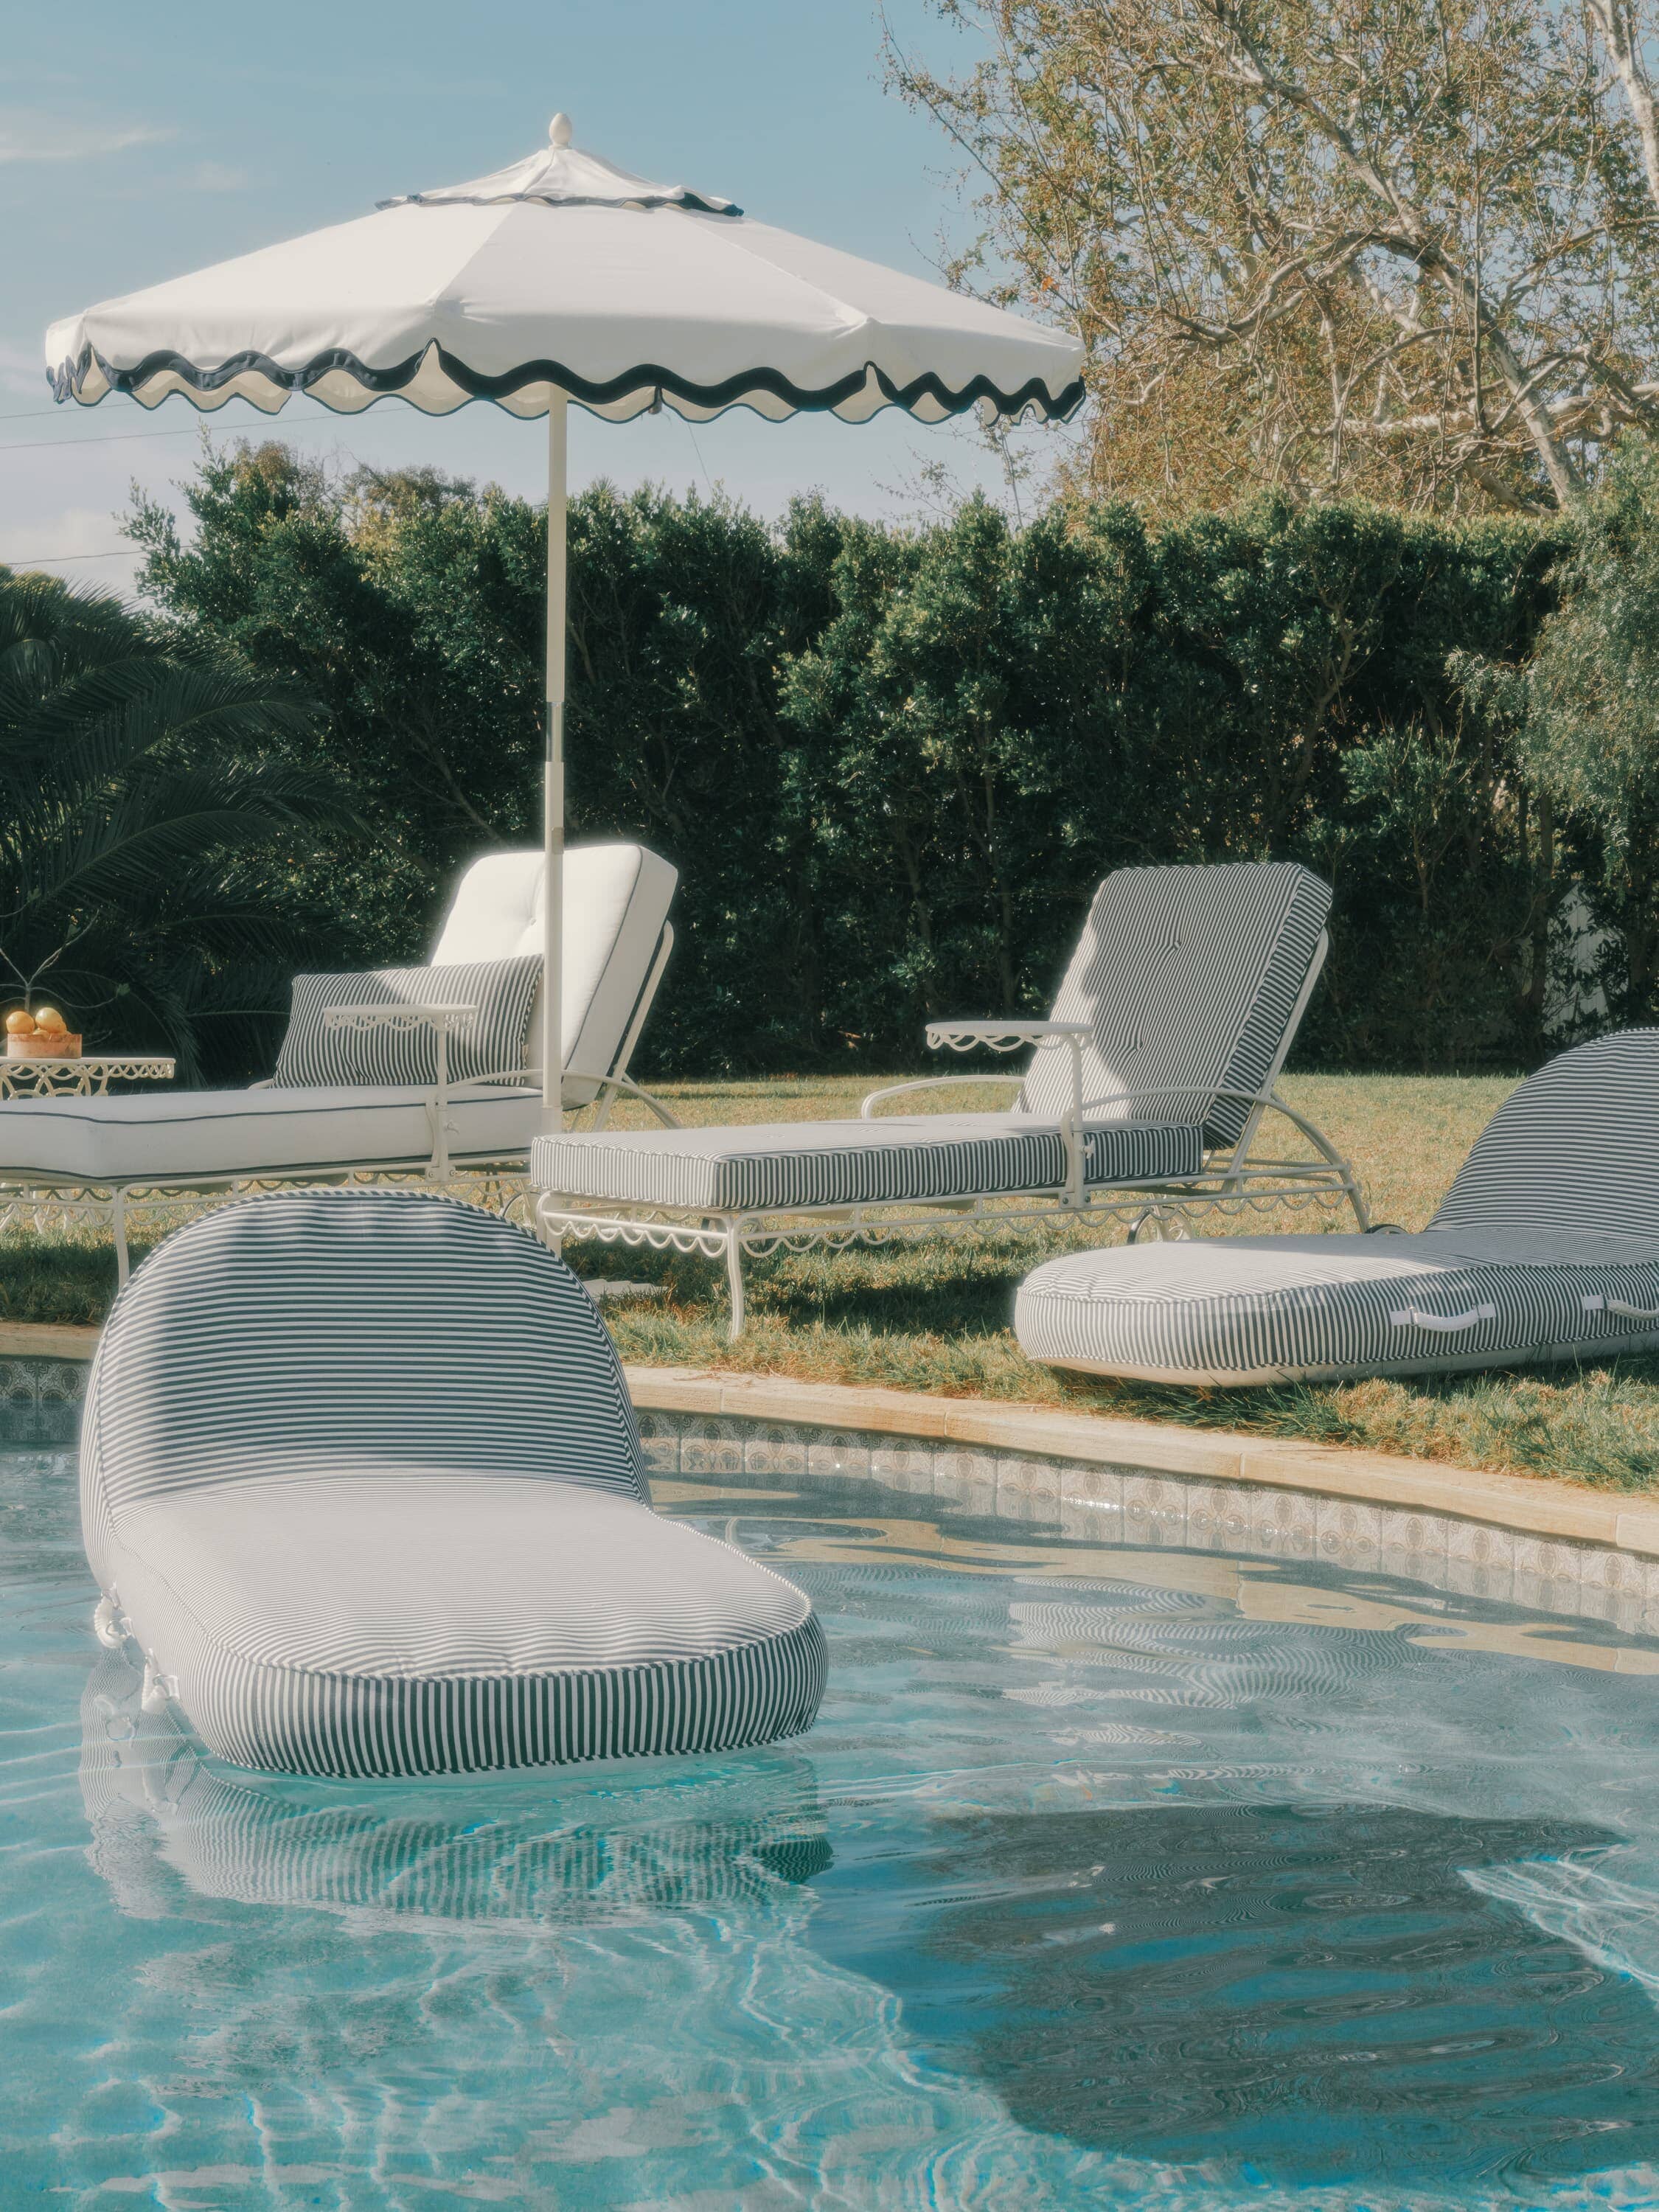 Navy and white sun loungers, navy pool loungers around a pool